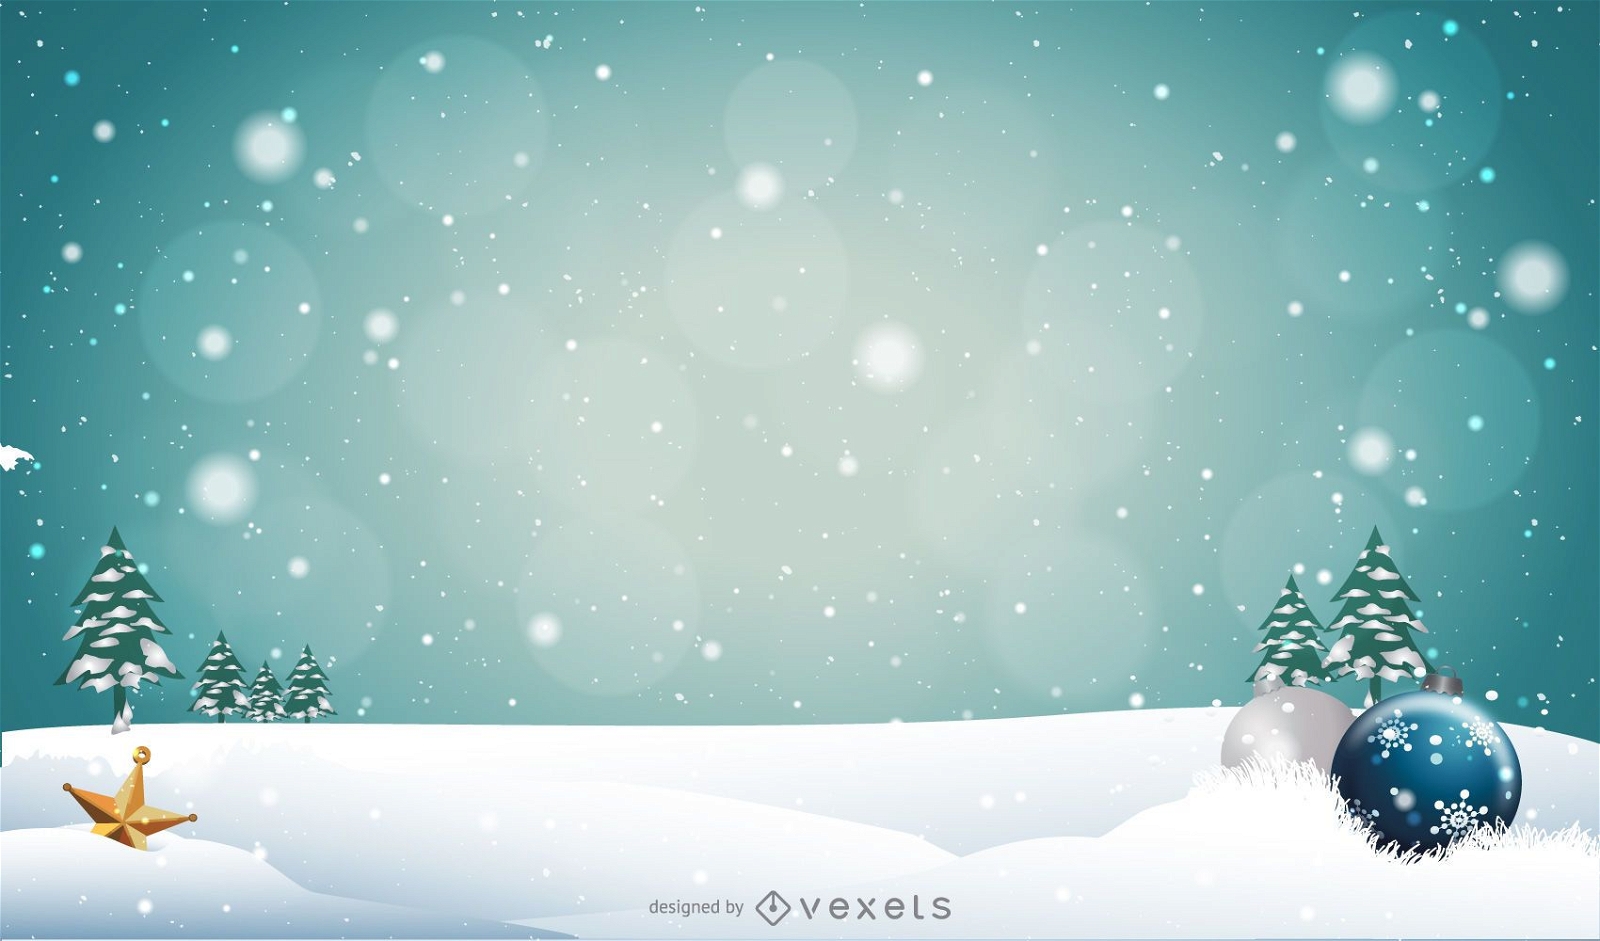 Snowy Christmas background